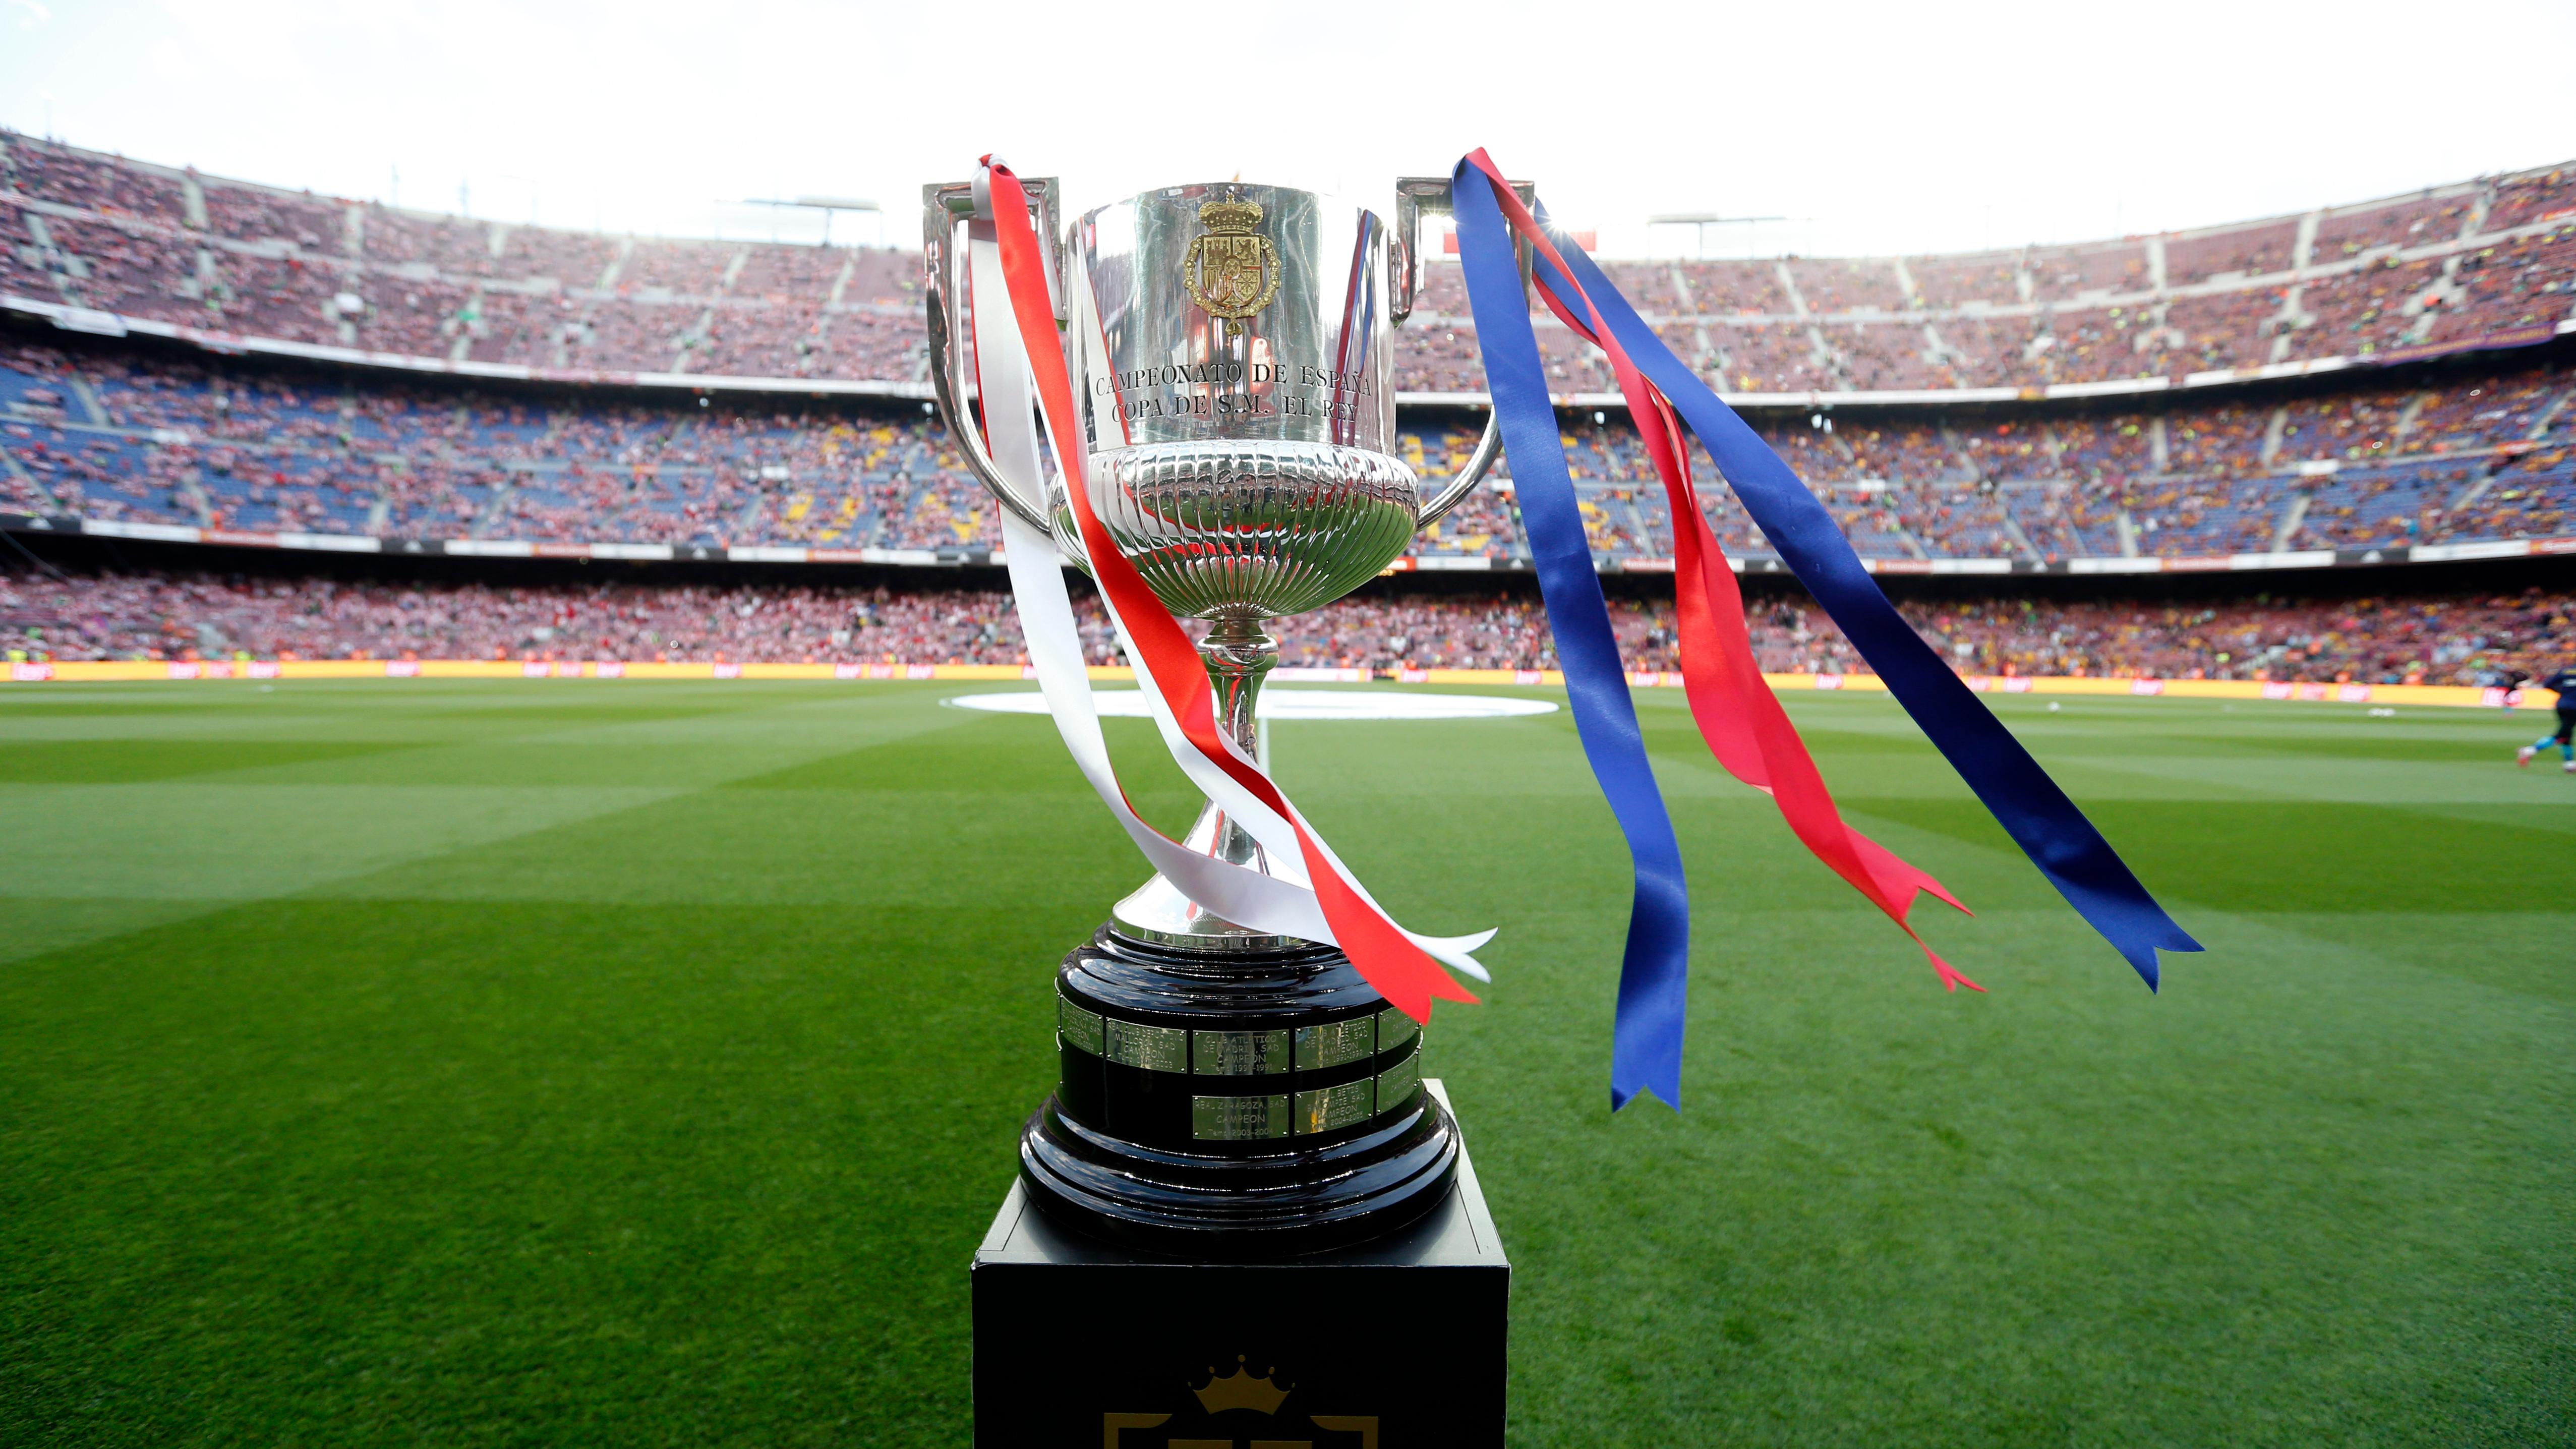 Two Copa del Rey finals in two weeks